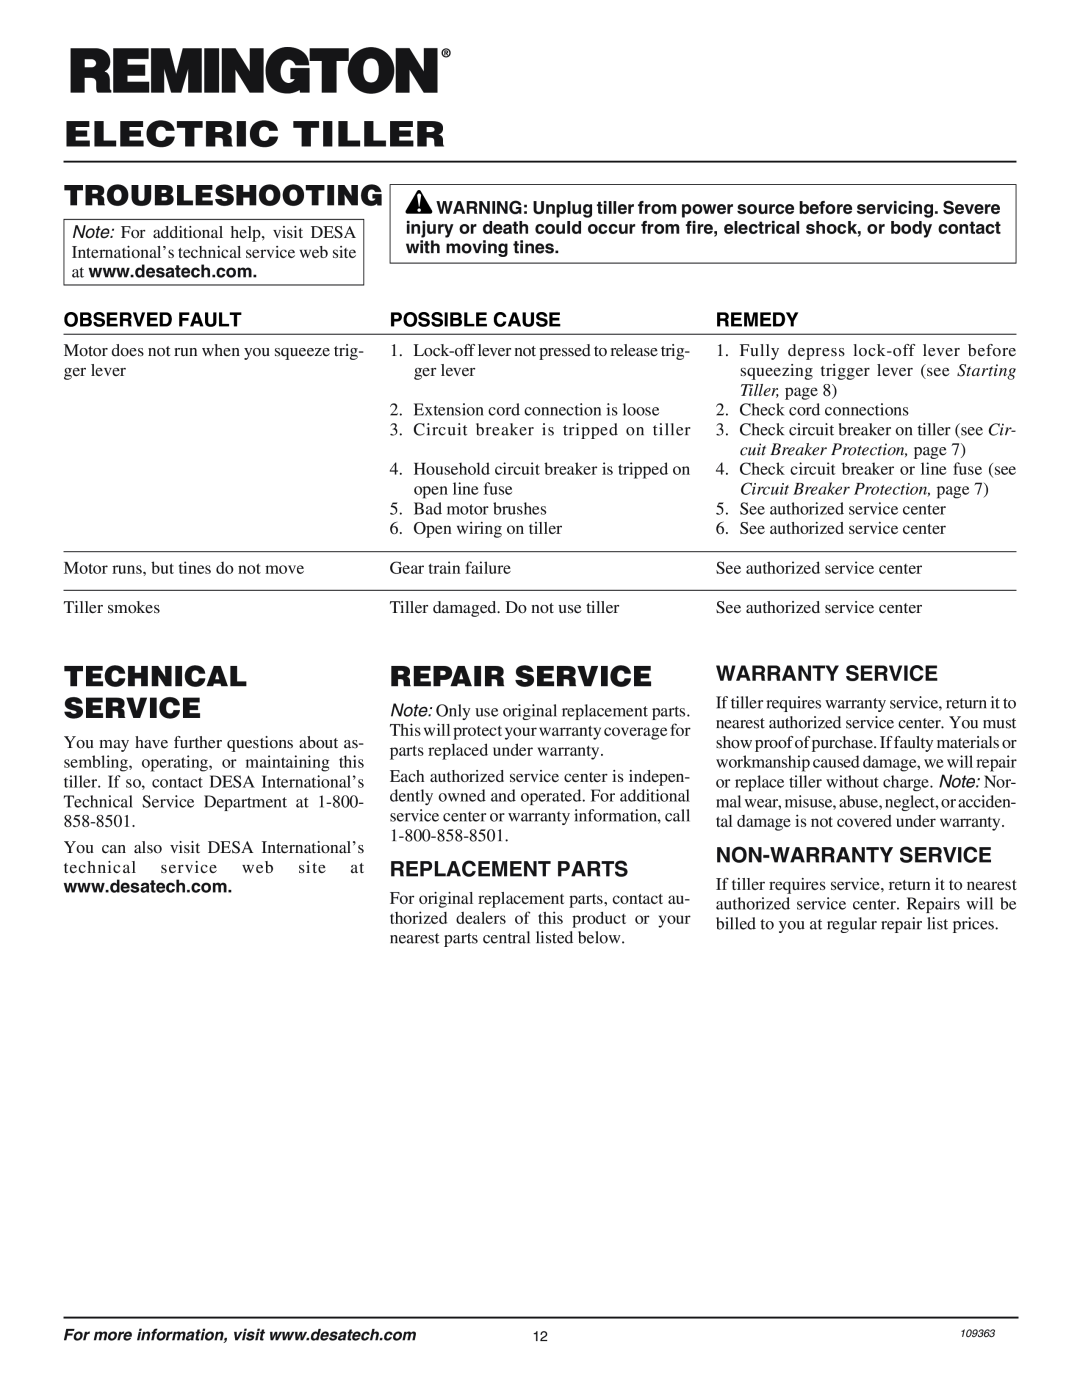 Remington 109312-01 Troubleshooting, Technical Service, Repair Service, Replacement Parts, Warranty Service, Remedy 